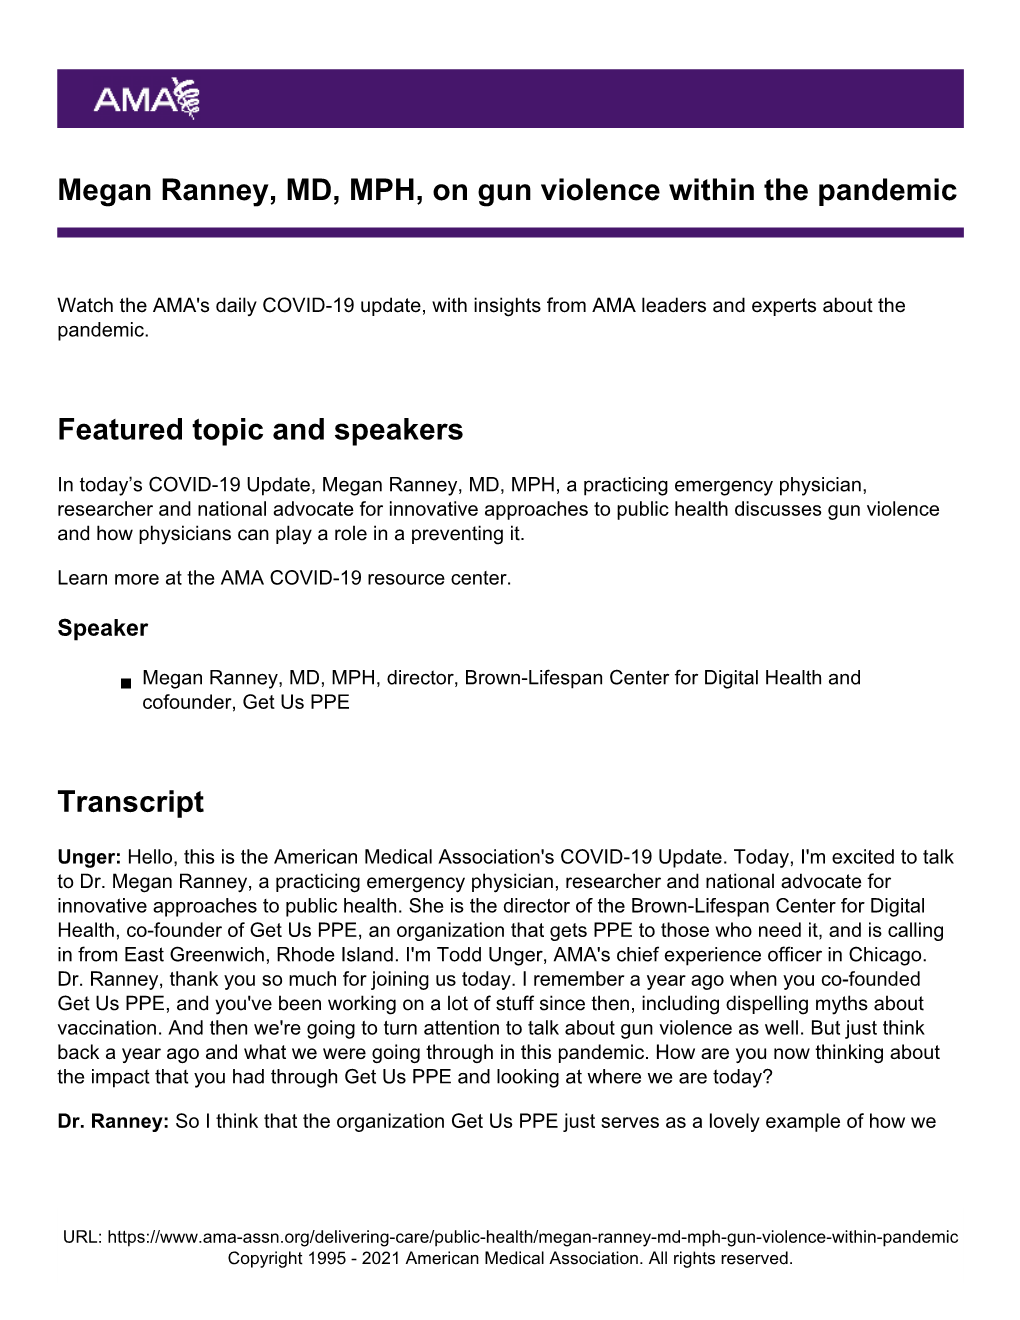 Megan Ranney, MD, MPH, on Gun Violence Within the Pandemic